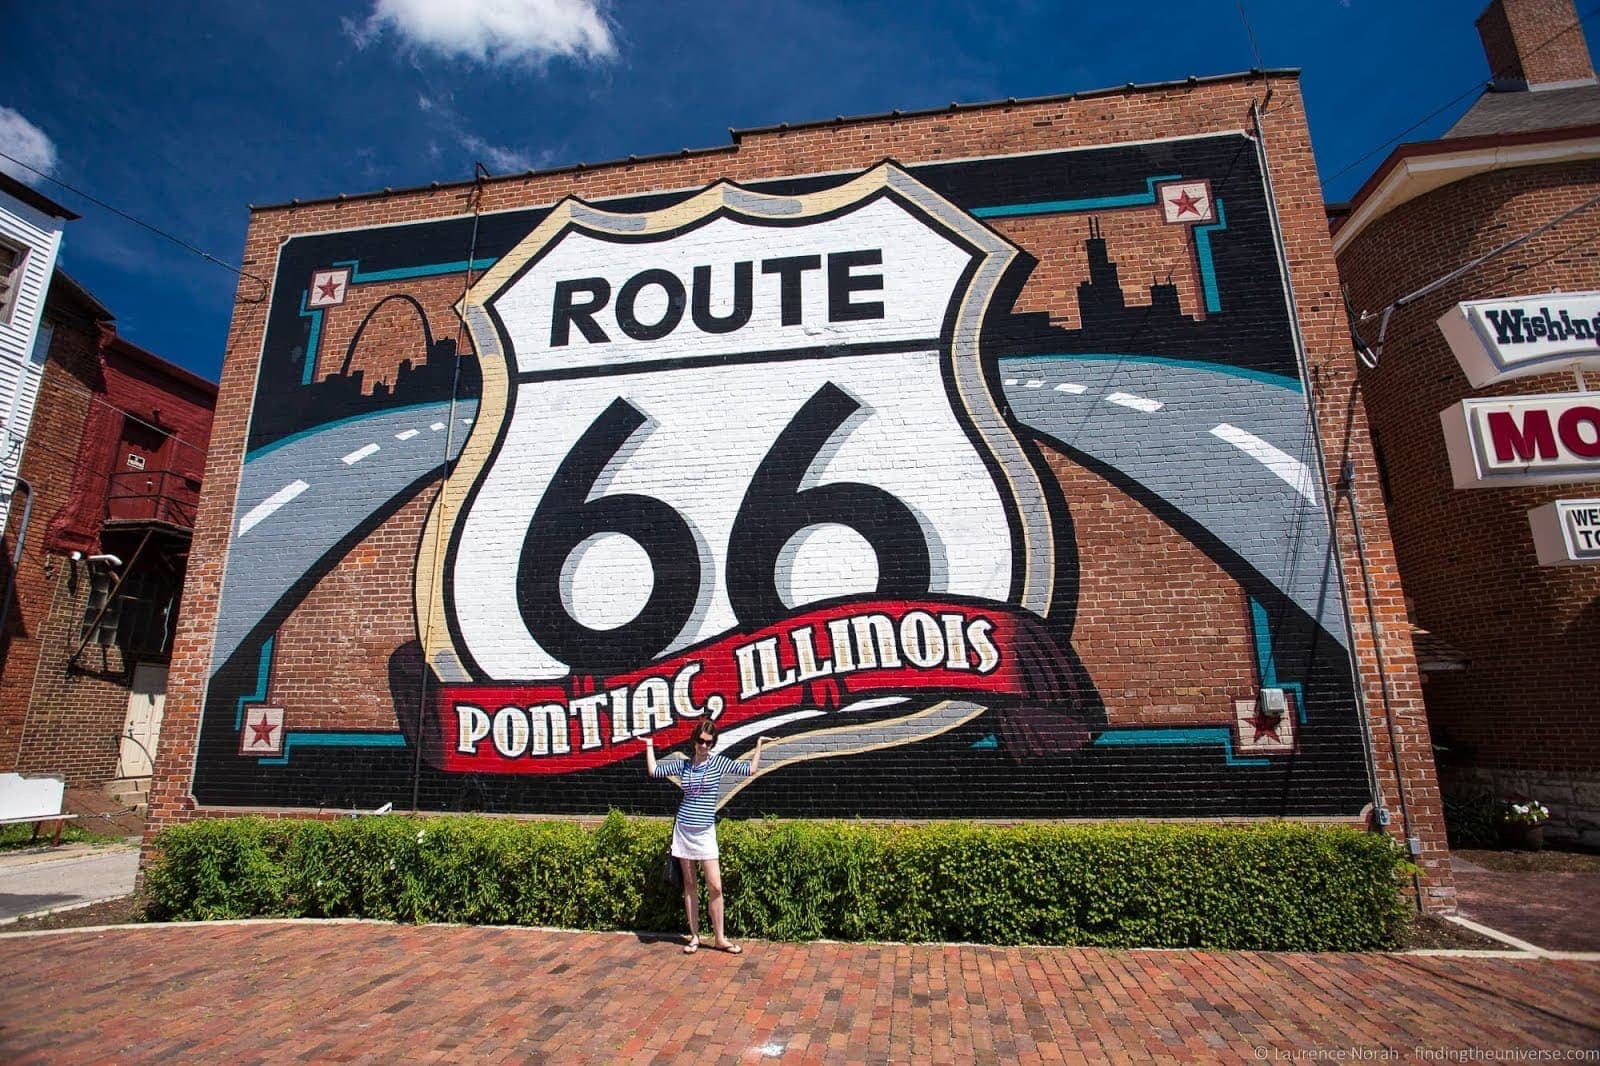 Route 66 in Illinois - All the highlights!